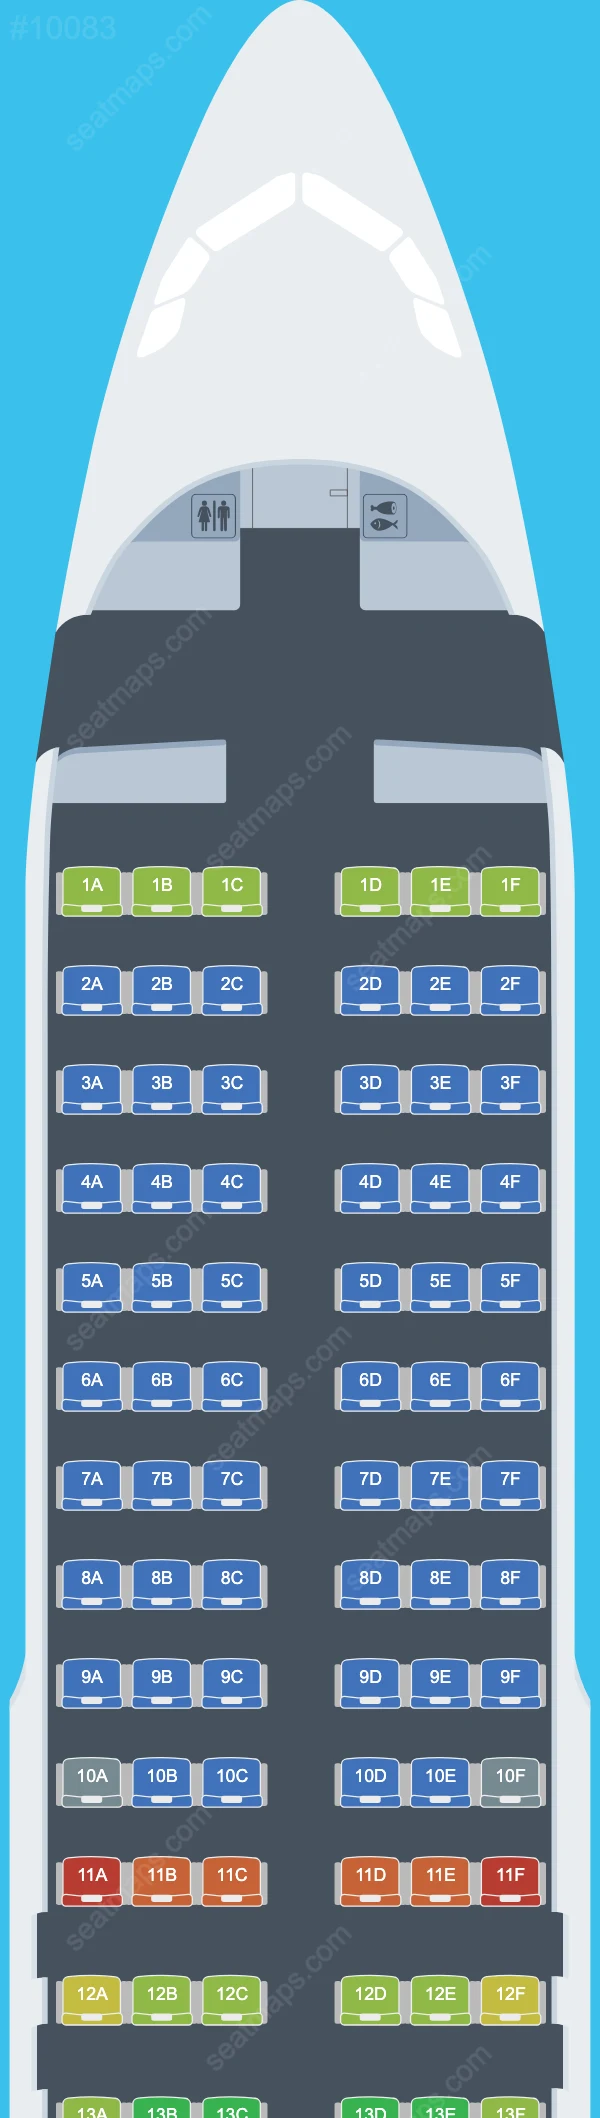 Air Sial Limited Airbus A320-200 seatmap mobile preview